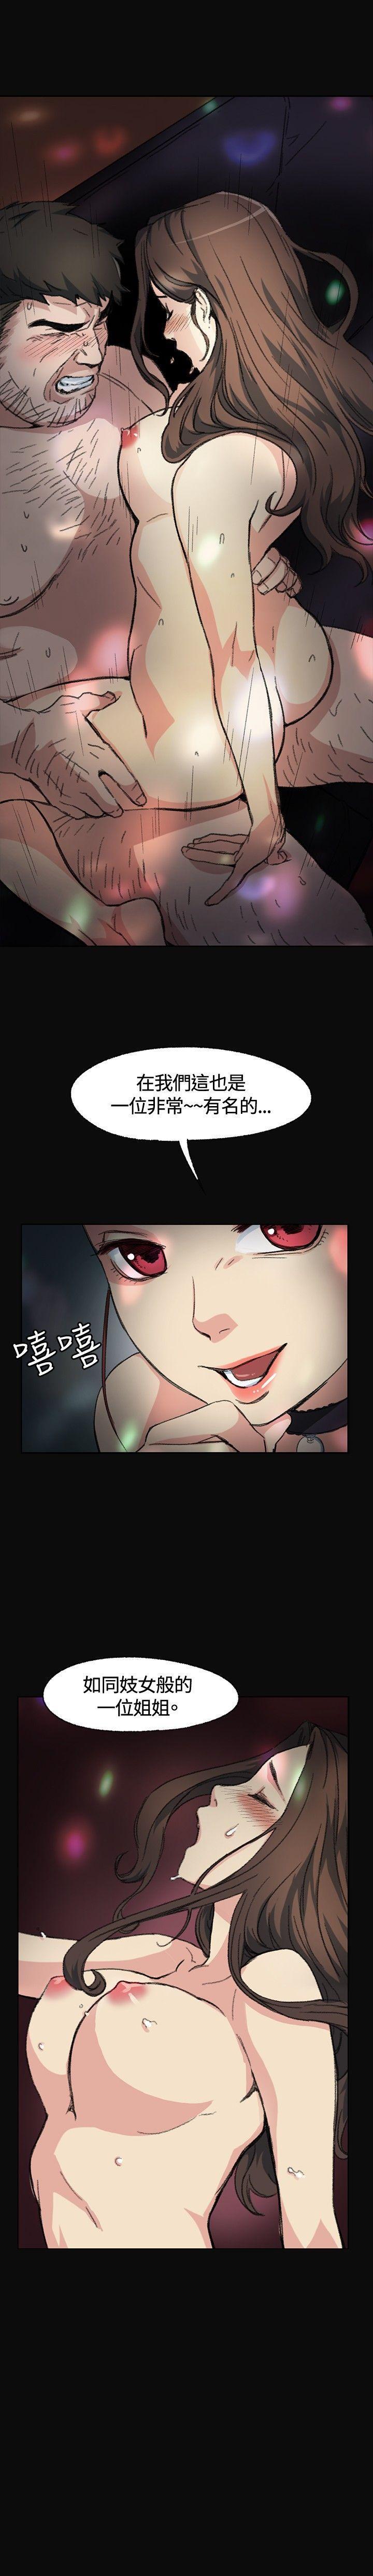 College 偶然 1-53 Girlfriends - Page 9